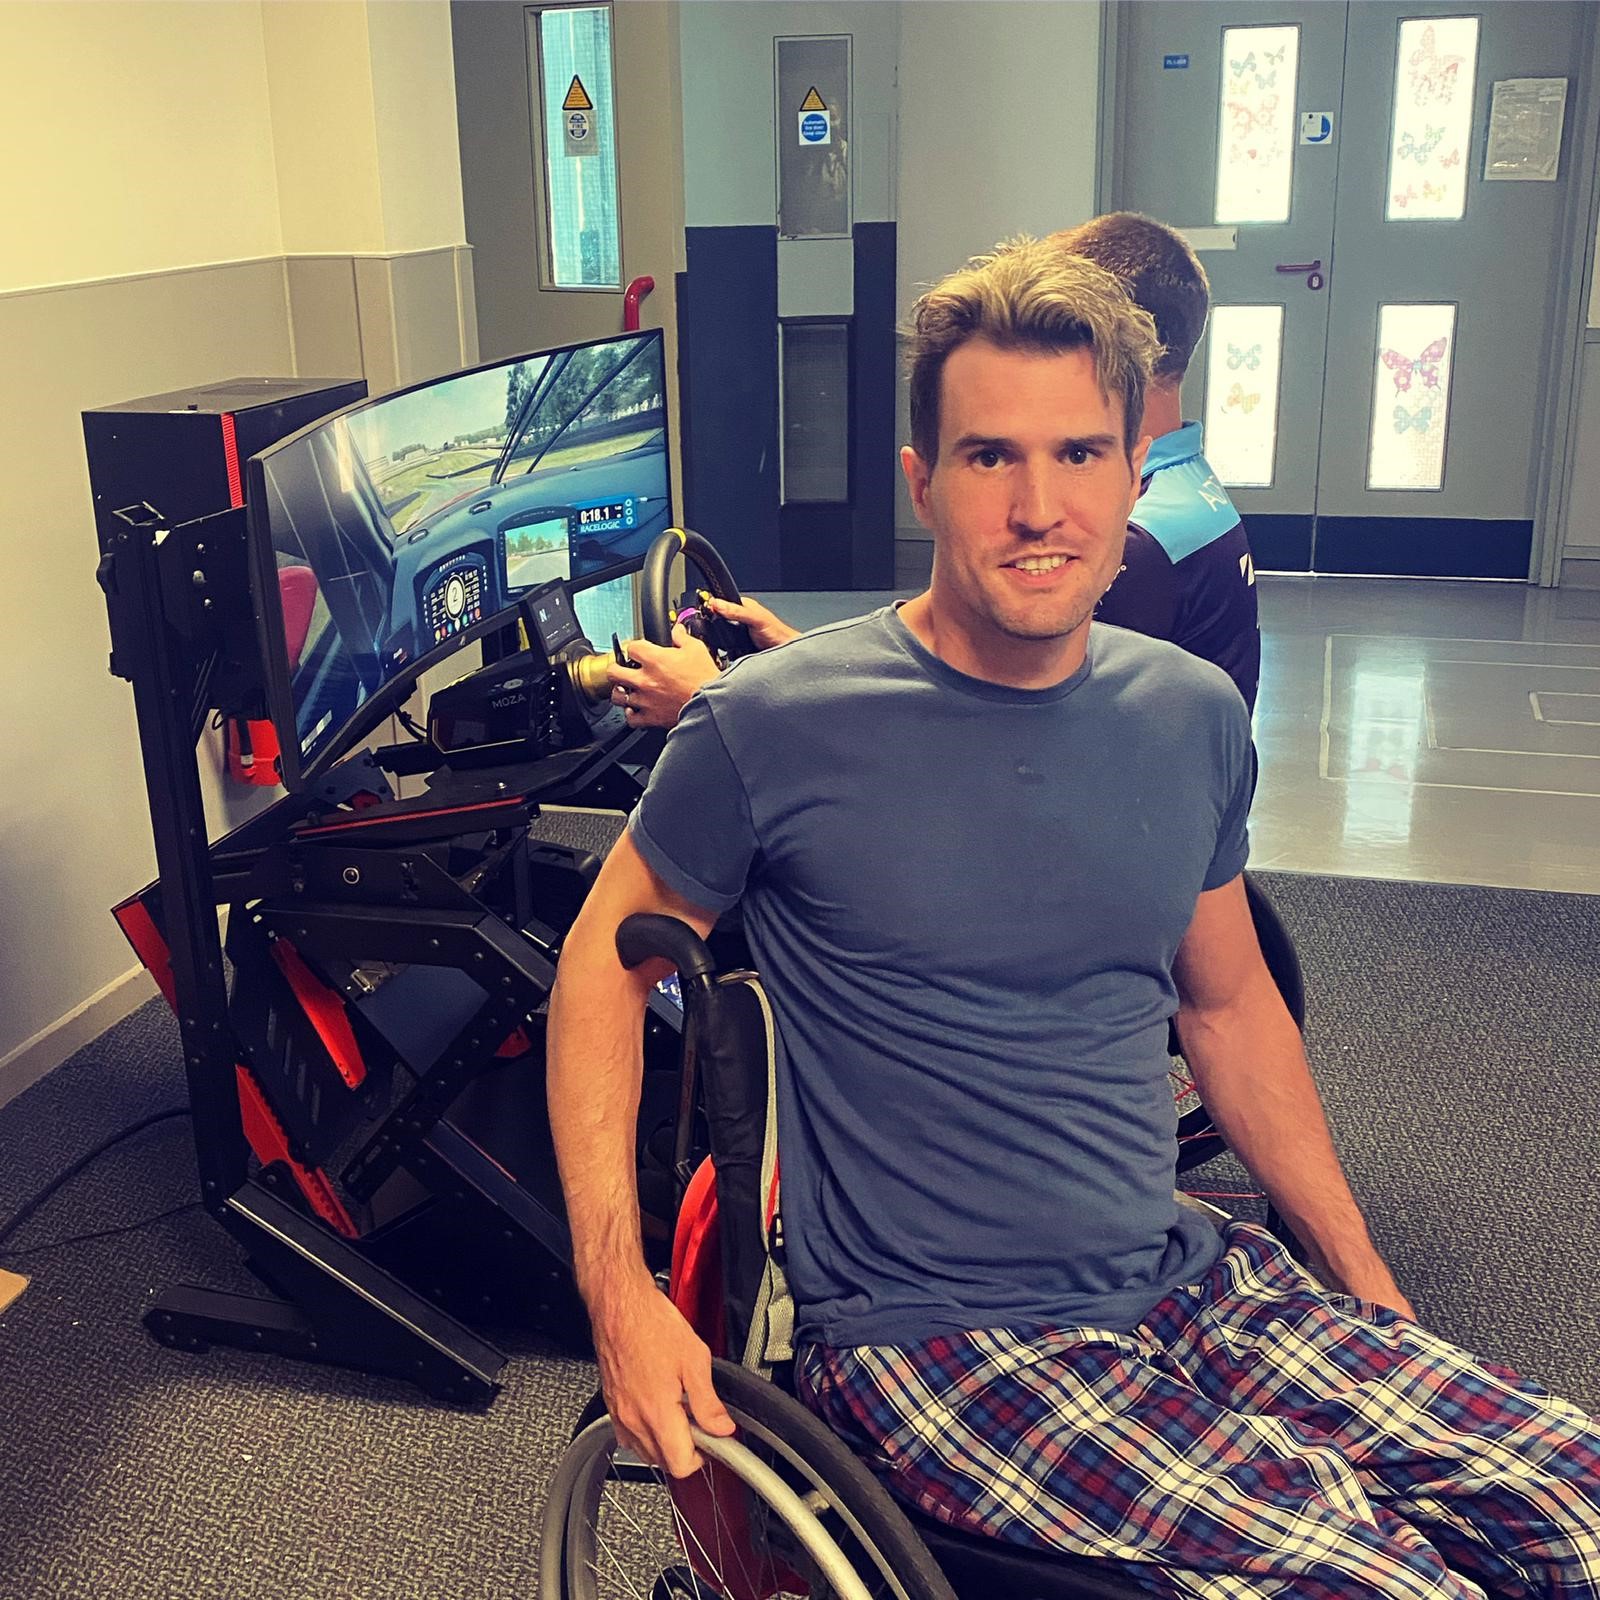 Spinal injury patients experience life as a racing driver thanks to Team BRIT